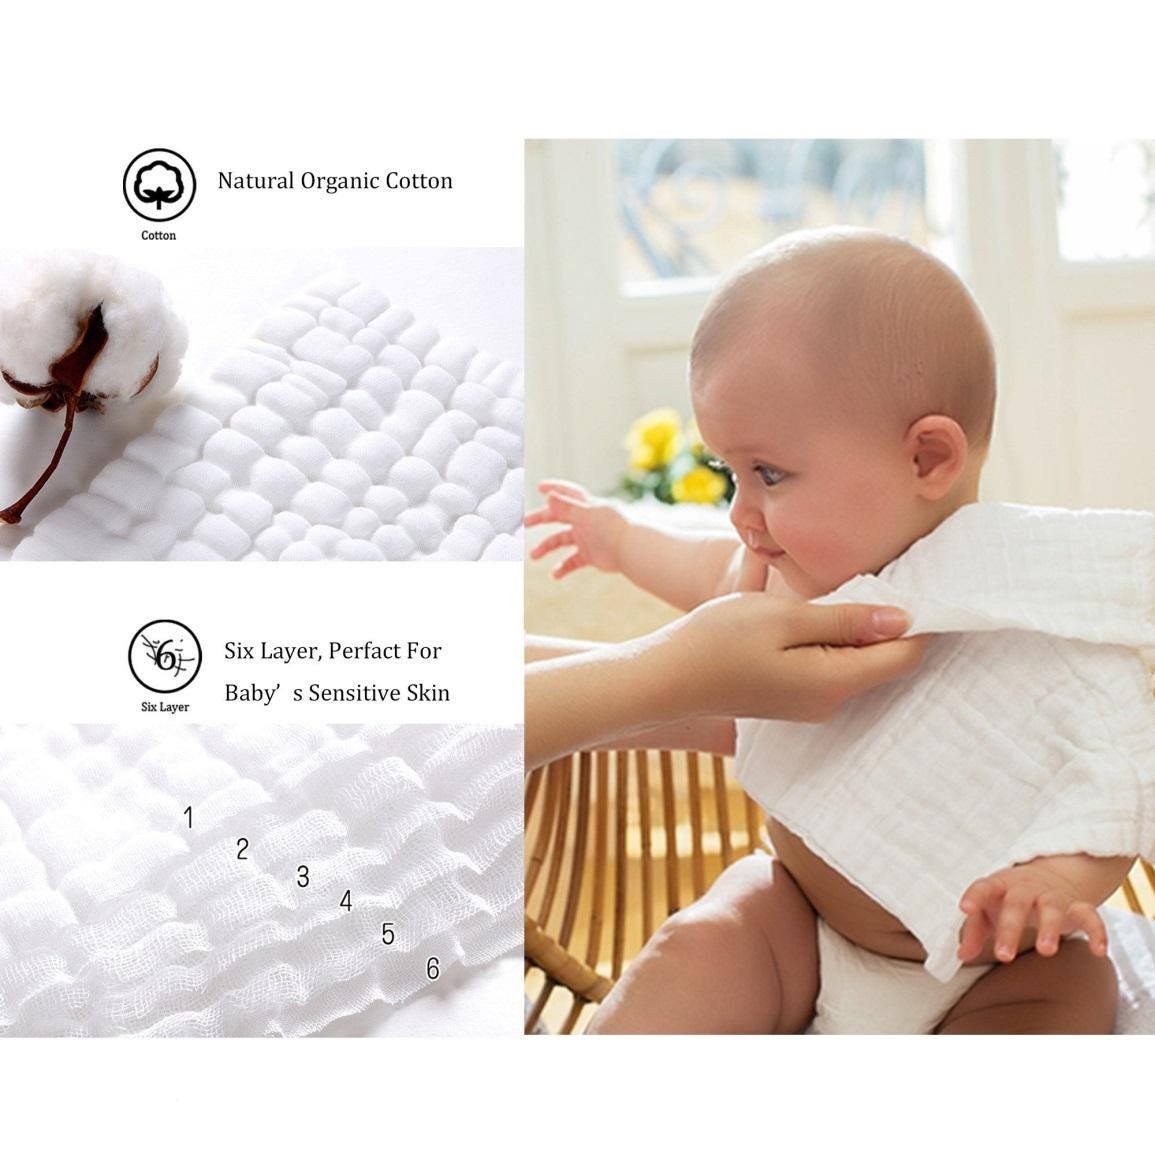 8 Best ways to use MUSLIN cloth for your baby, by Mamapear